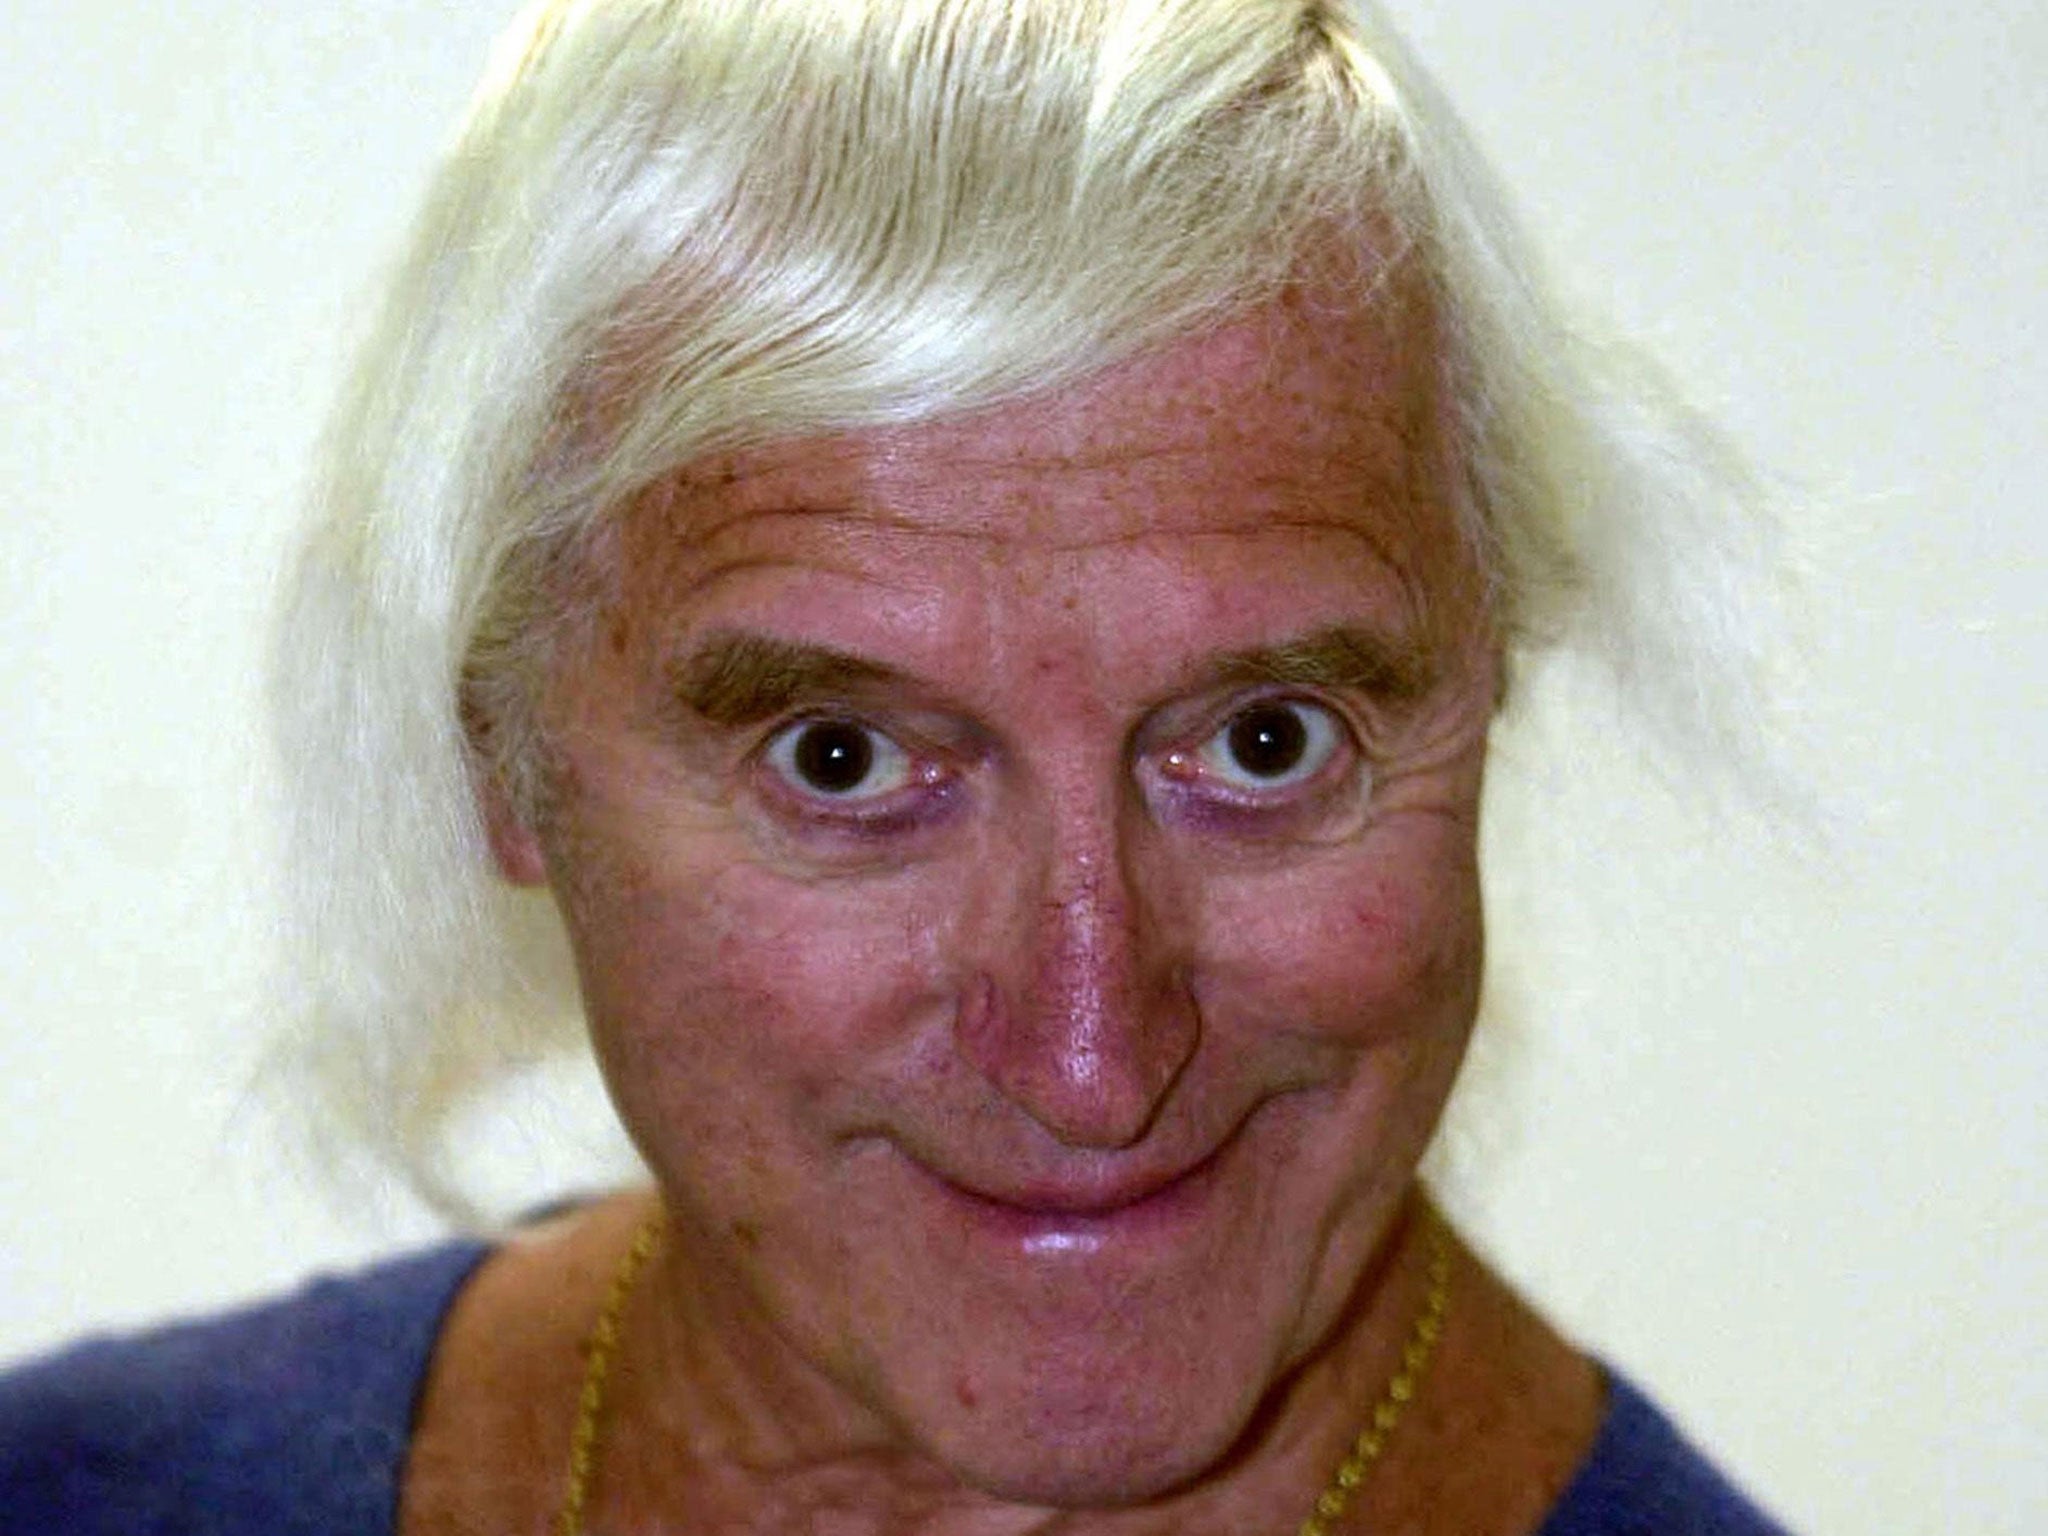 Thousands of pages of evidence gathered during an inquiry into Newsnight's decision to drop its Jimmy Savile investigation were today published by the BBC in a bid to be “open and transparent”